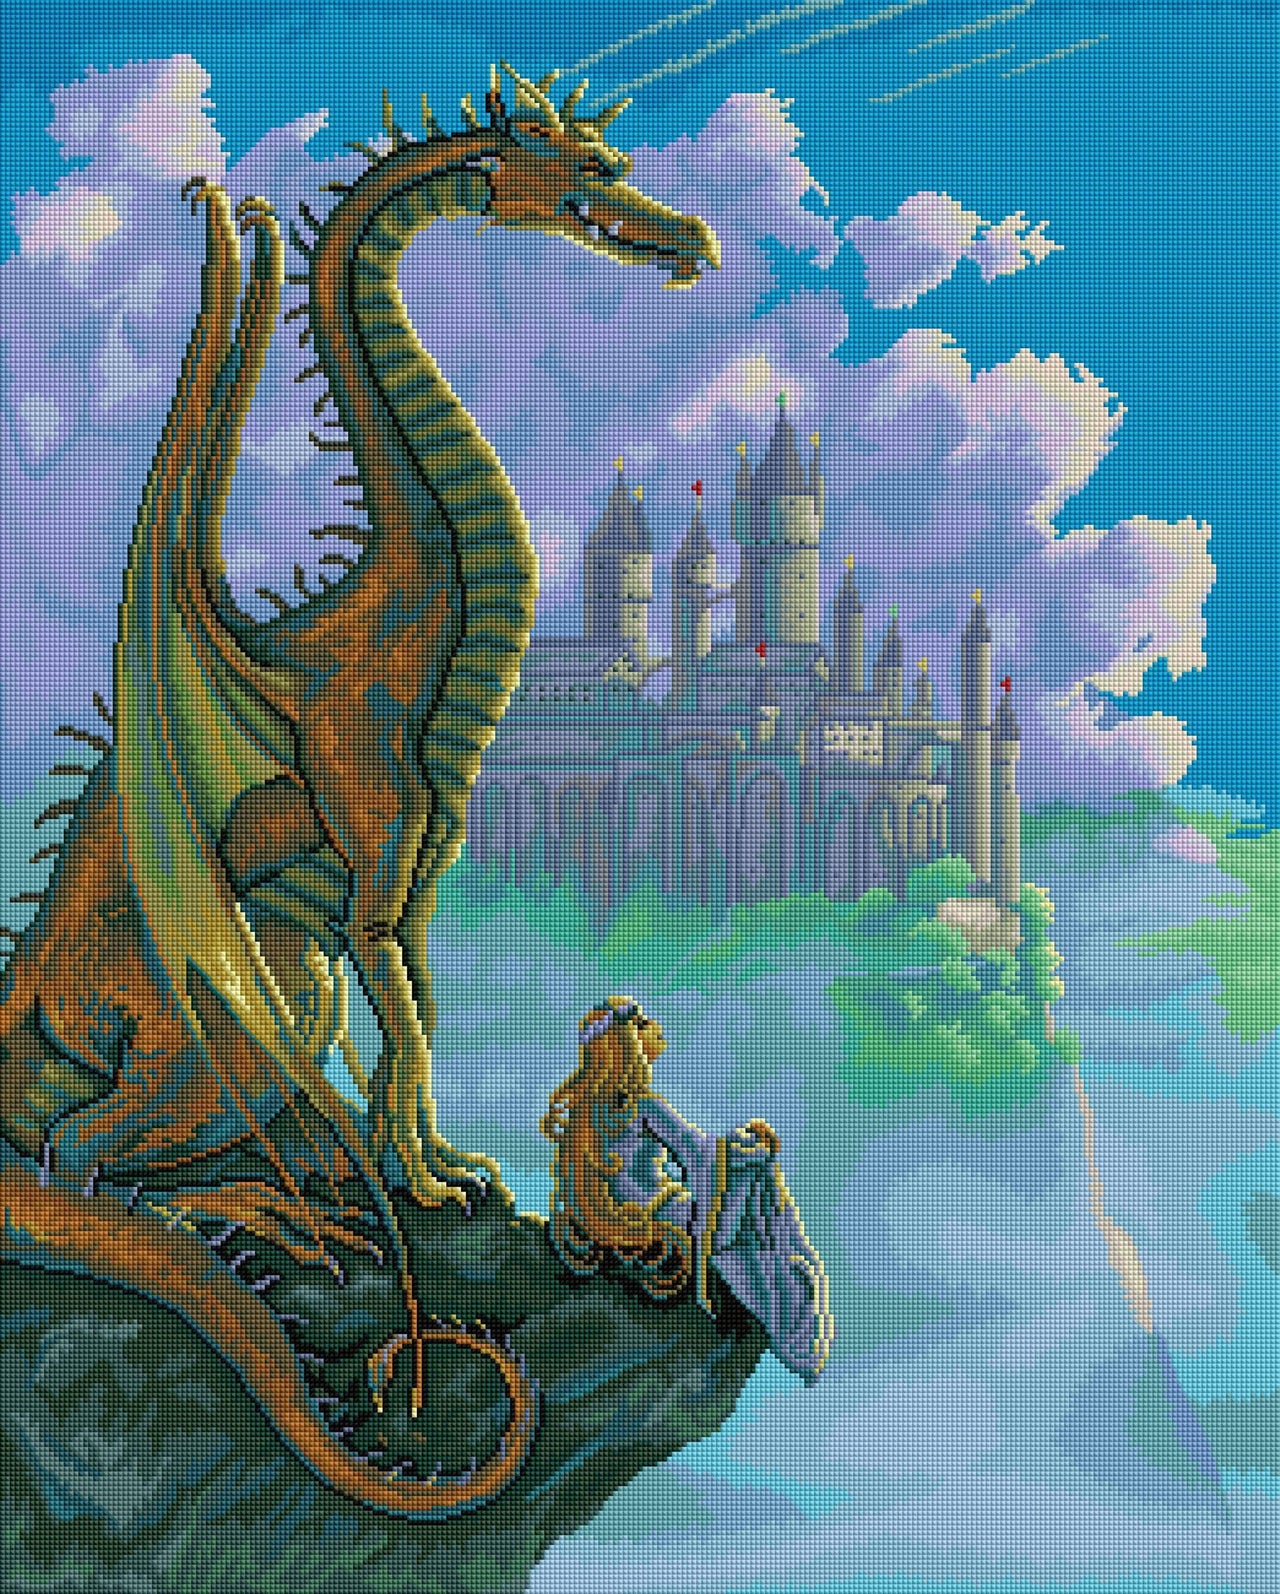 Diamond Painting Dragon Cliff 25.6" x 31.9" (65cm x 81cm) / Square with 52 Colors including 2 ABs / 84,825